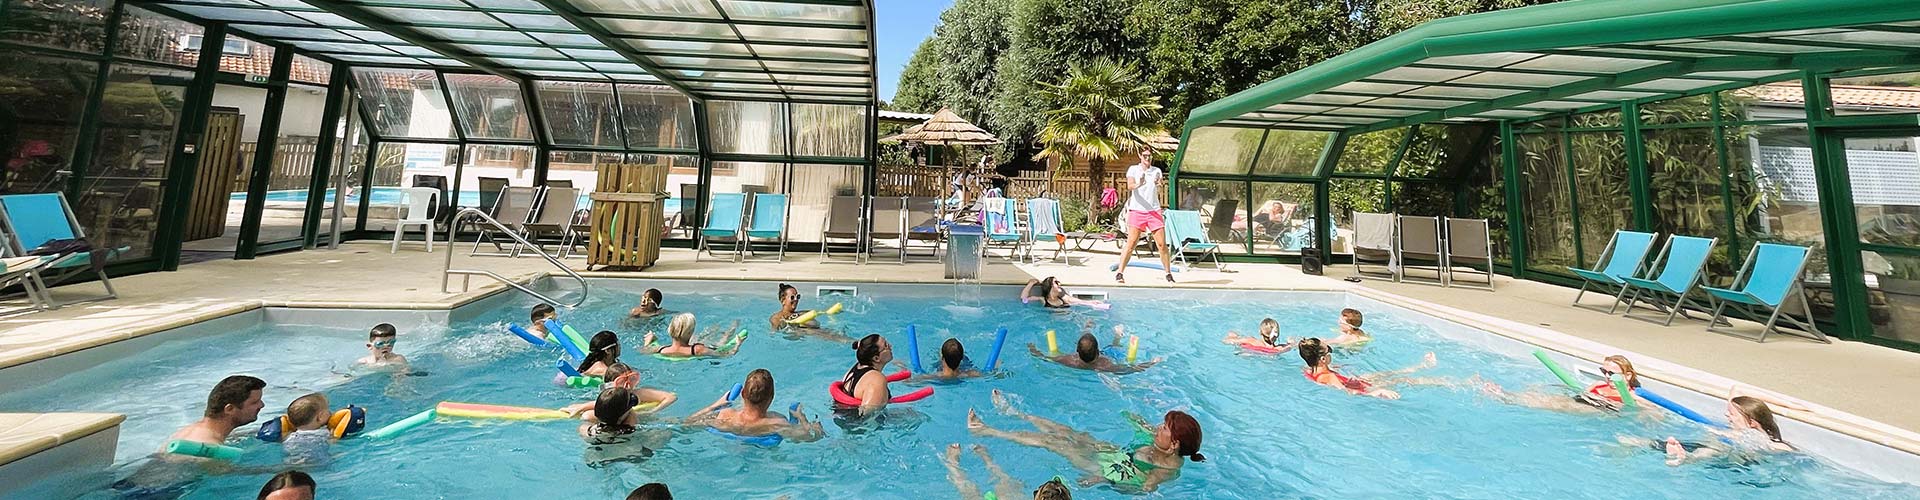 http://Aquatic%20area%20with%20slides,%20indoor%20and%20heated%20swimming%20pool.%20Also%20enjoy%20our%20sauna%20and%20jacuzzi%20area.